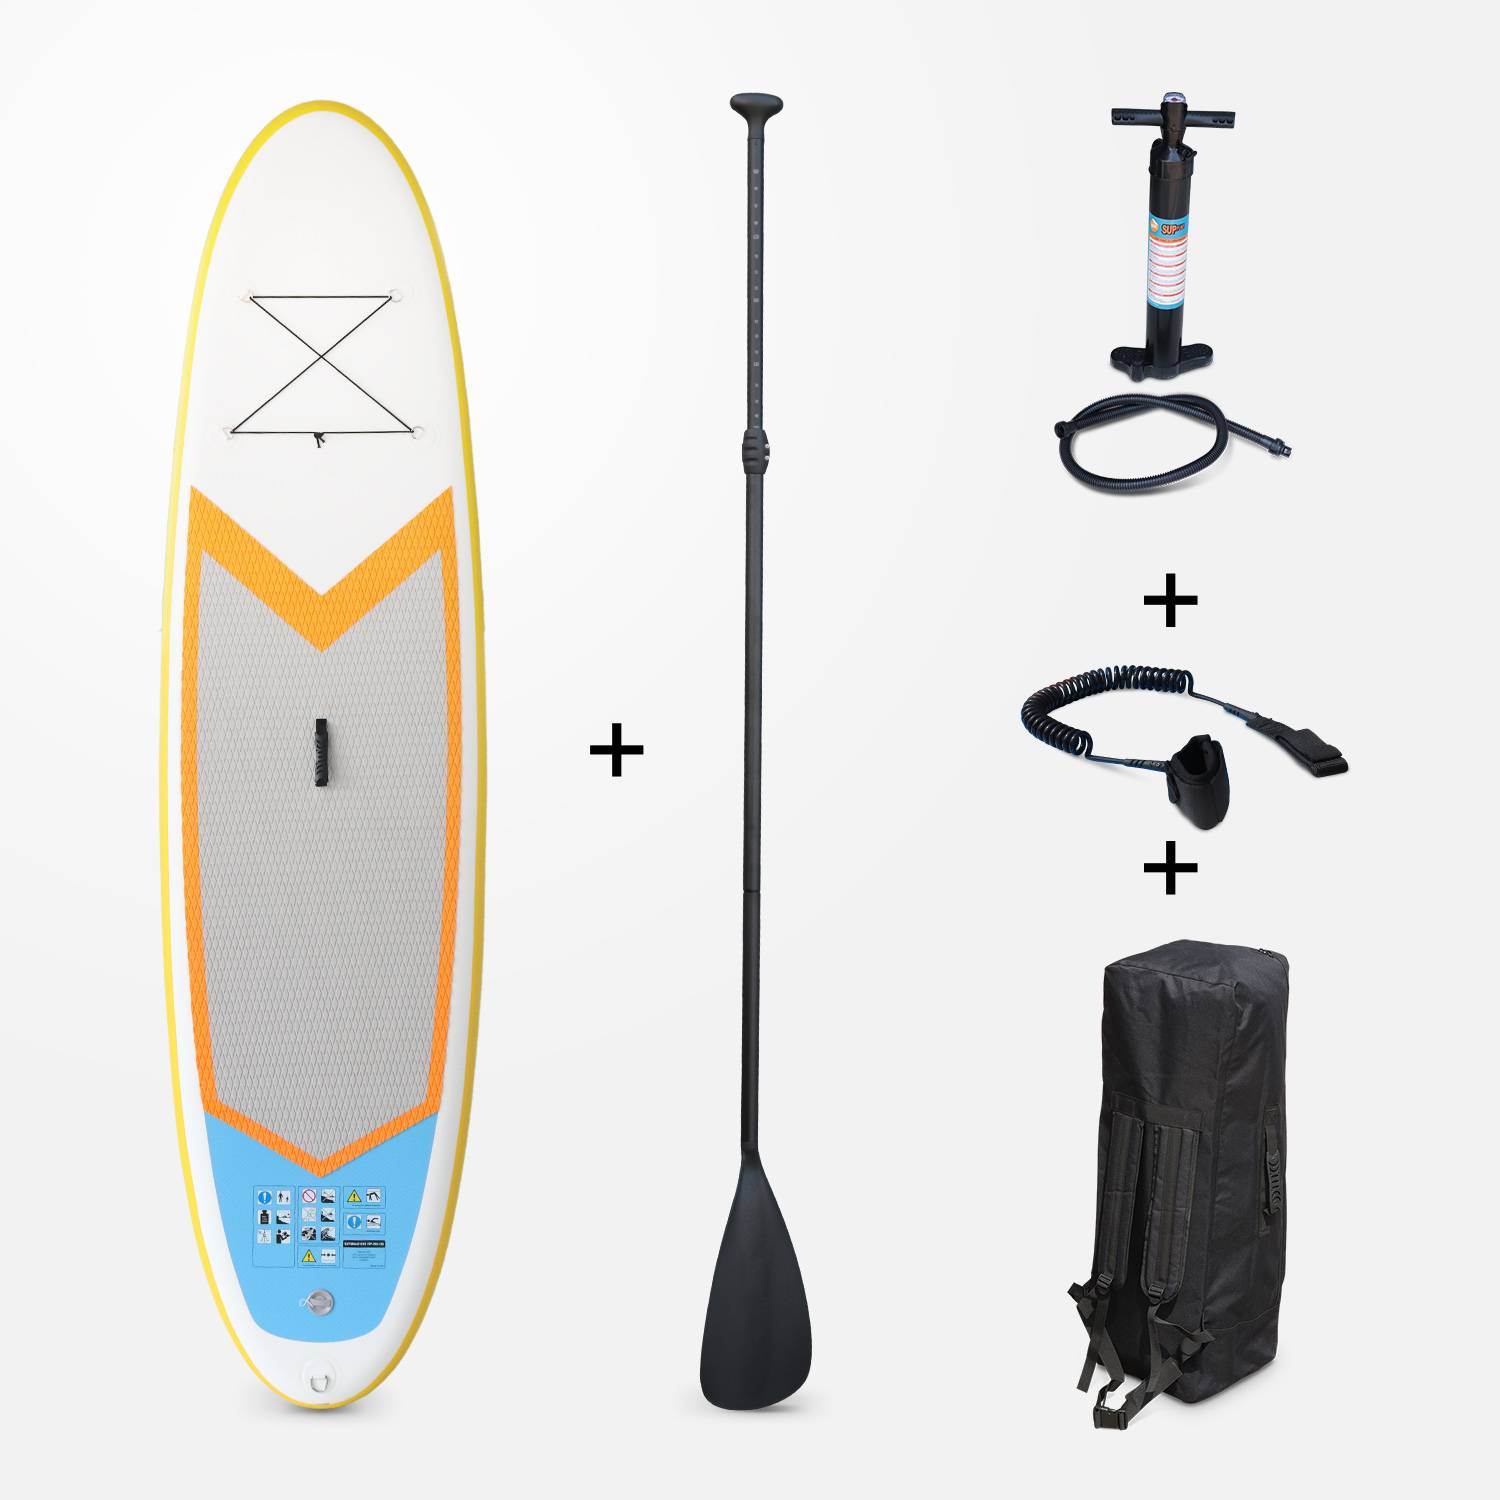 9.84FT Inflatable Stand Up Paddle Board - SUP kit with double-action high-pressure pump, paddle, leash and carry bag - Nico - Yellow Photo1